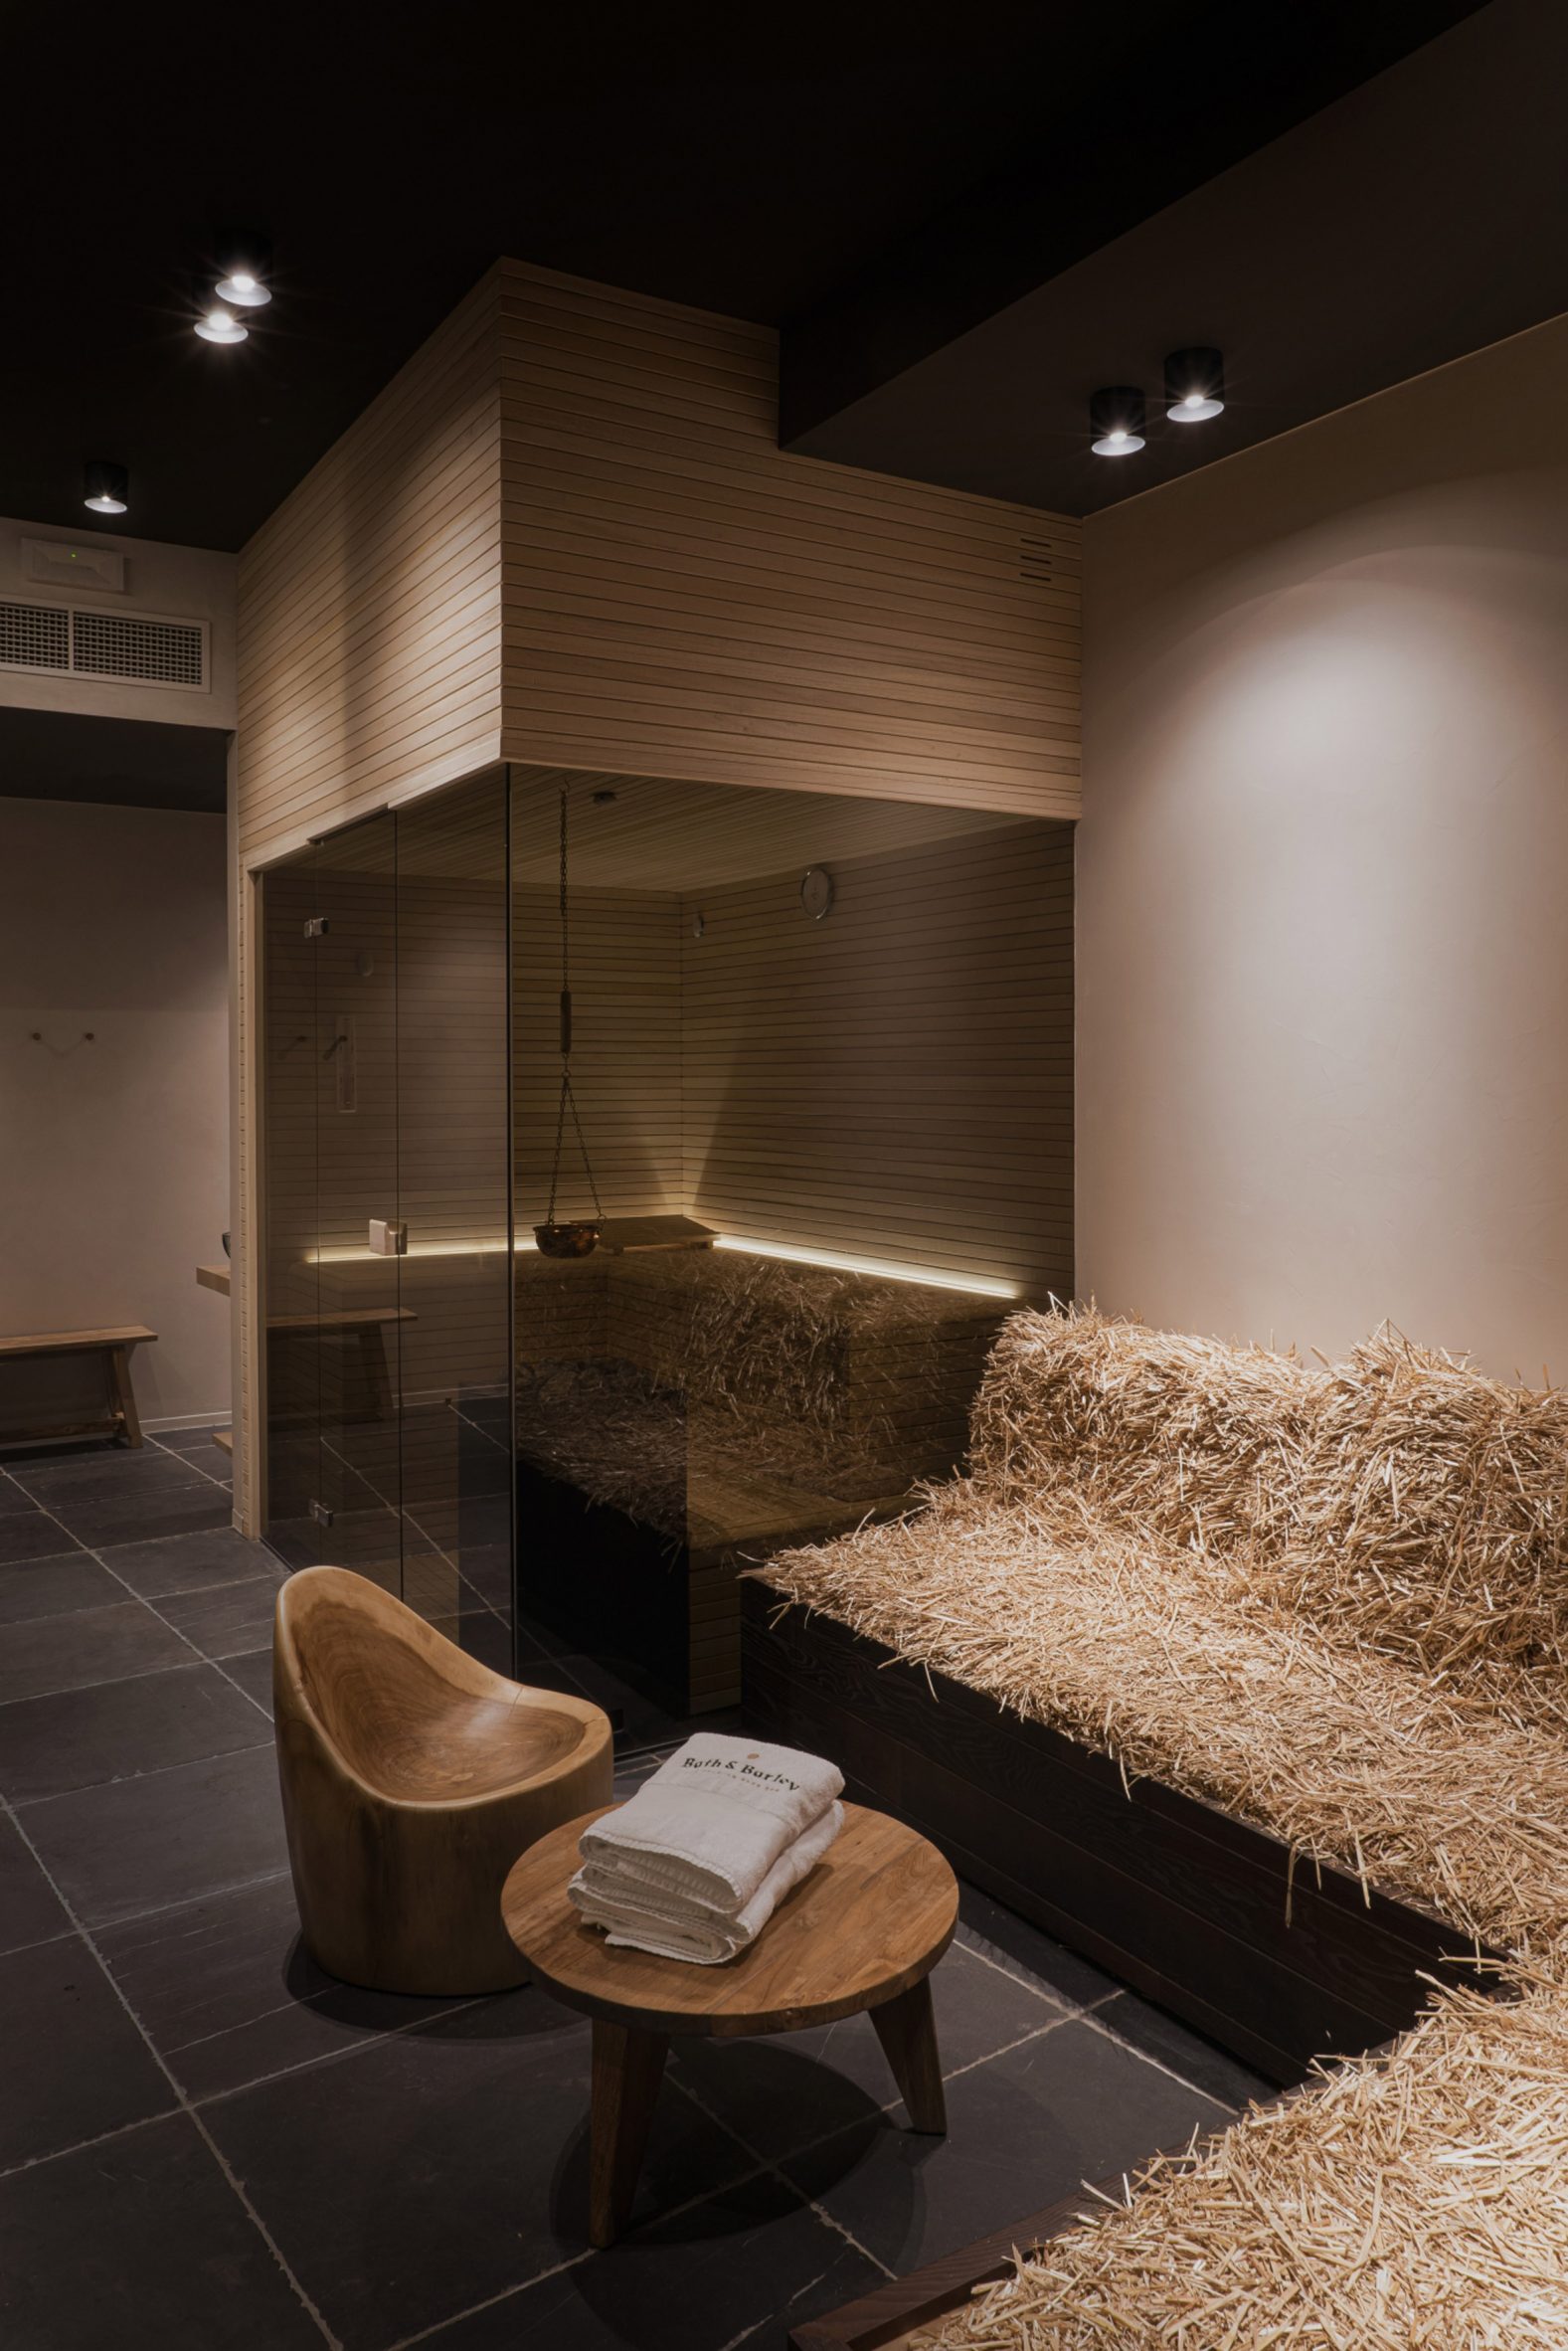 Straw beds in spa